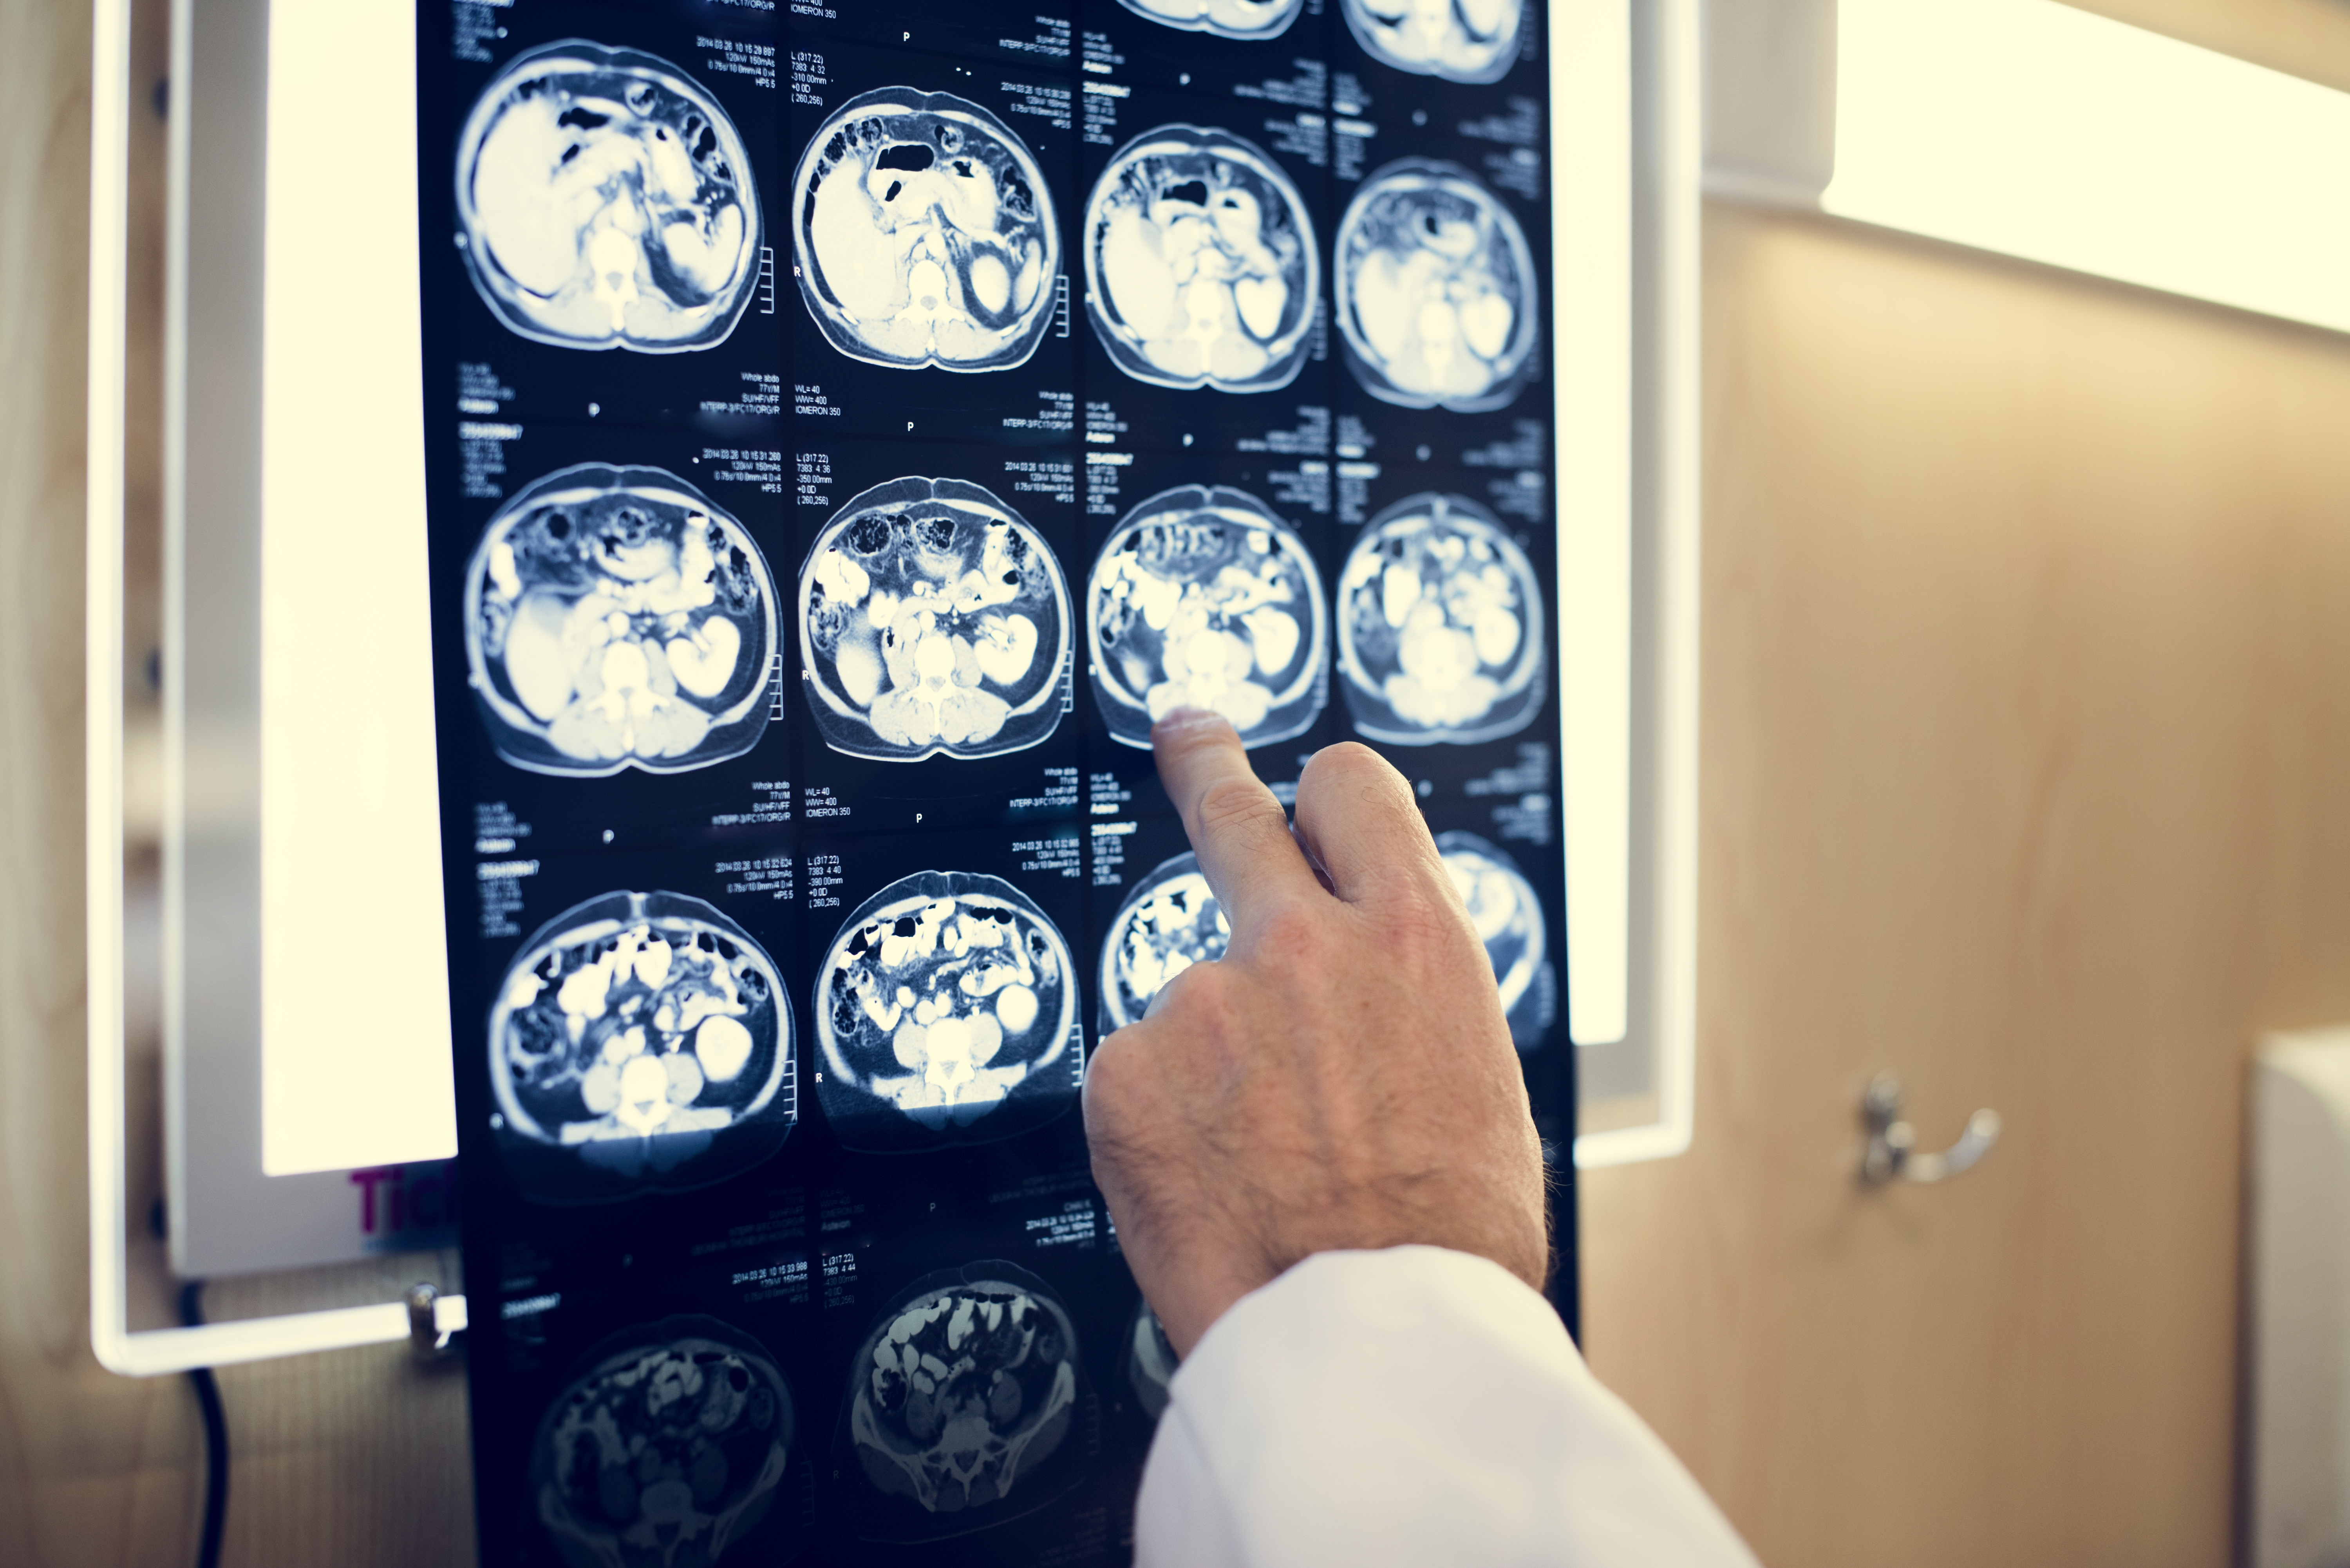 Brain MRI on a light box with hand pointing at one of the images